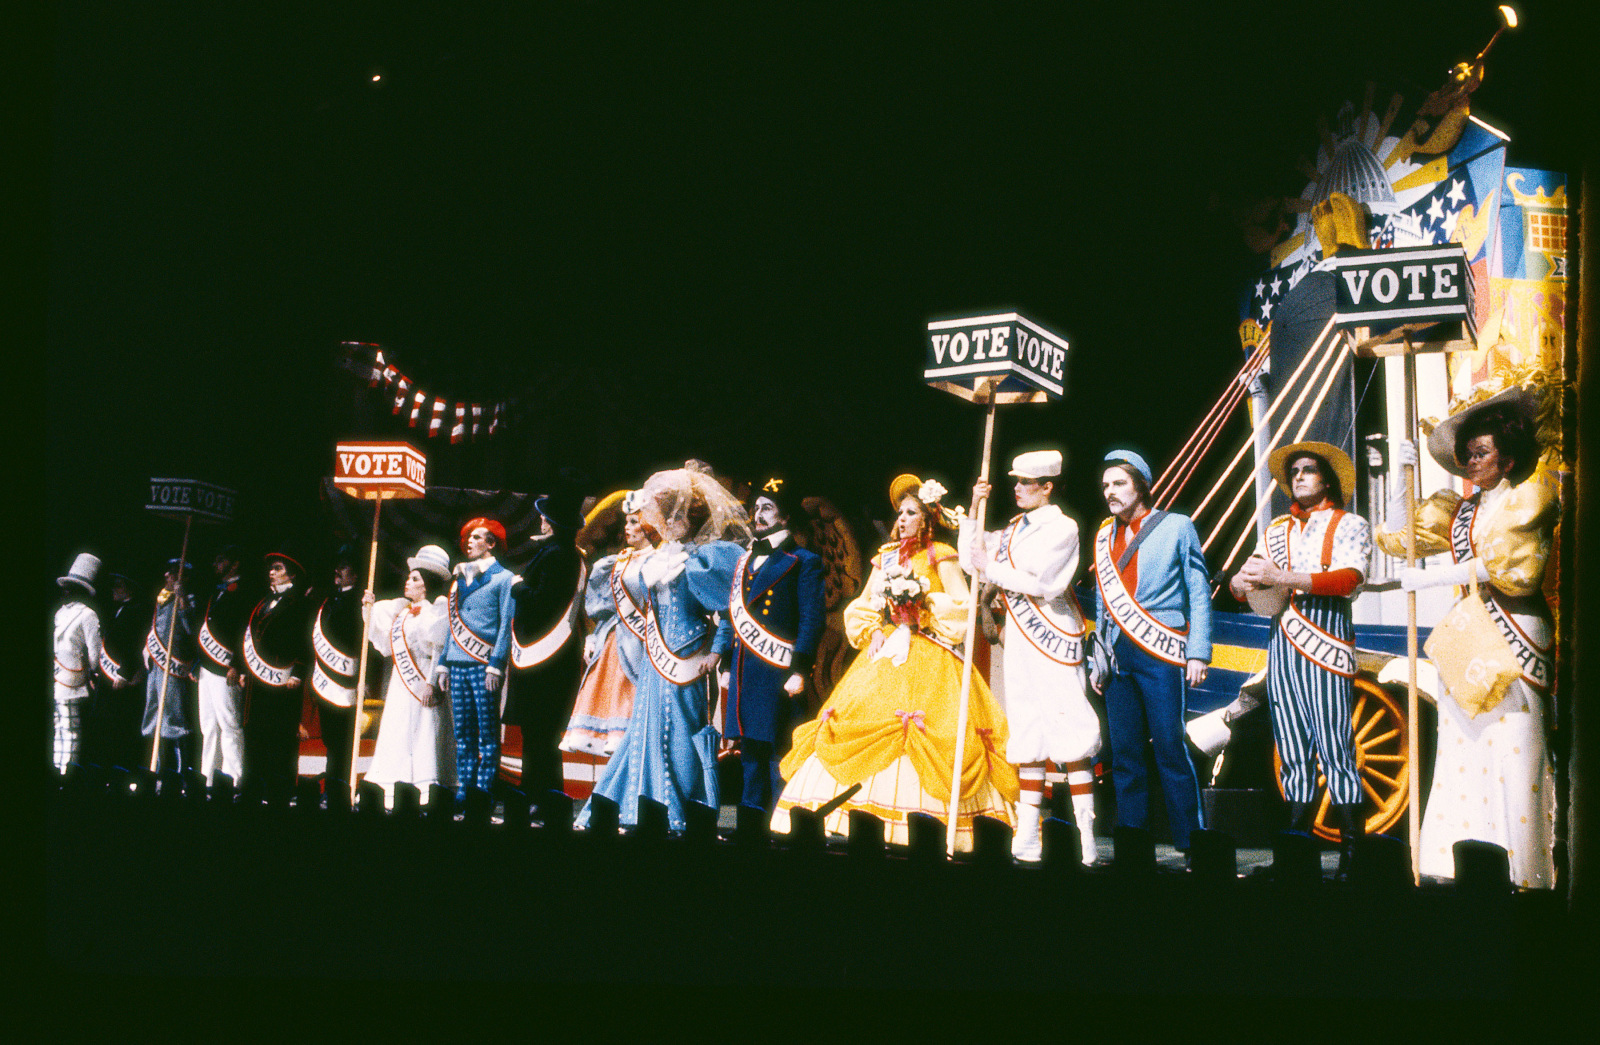 A scene from Virgil Thomson’s opera The Mother of Us All, performed by the Santa Fe Opera Company, costumes and set design by Indiana, in August 1976